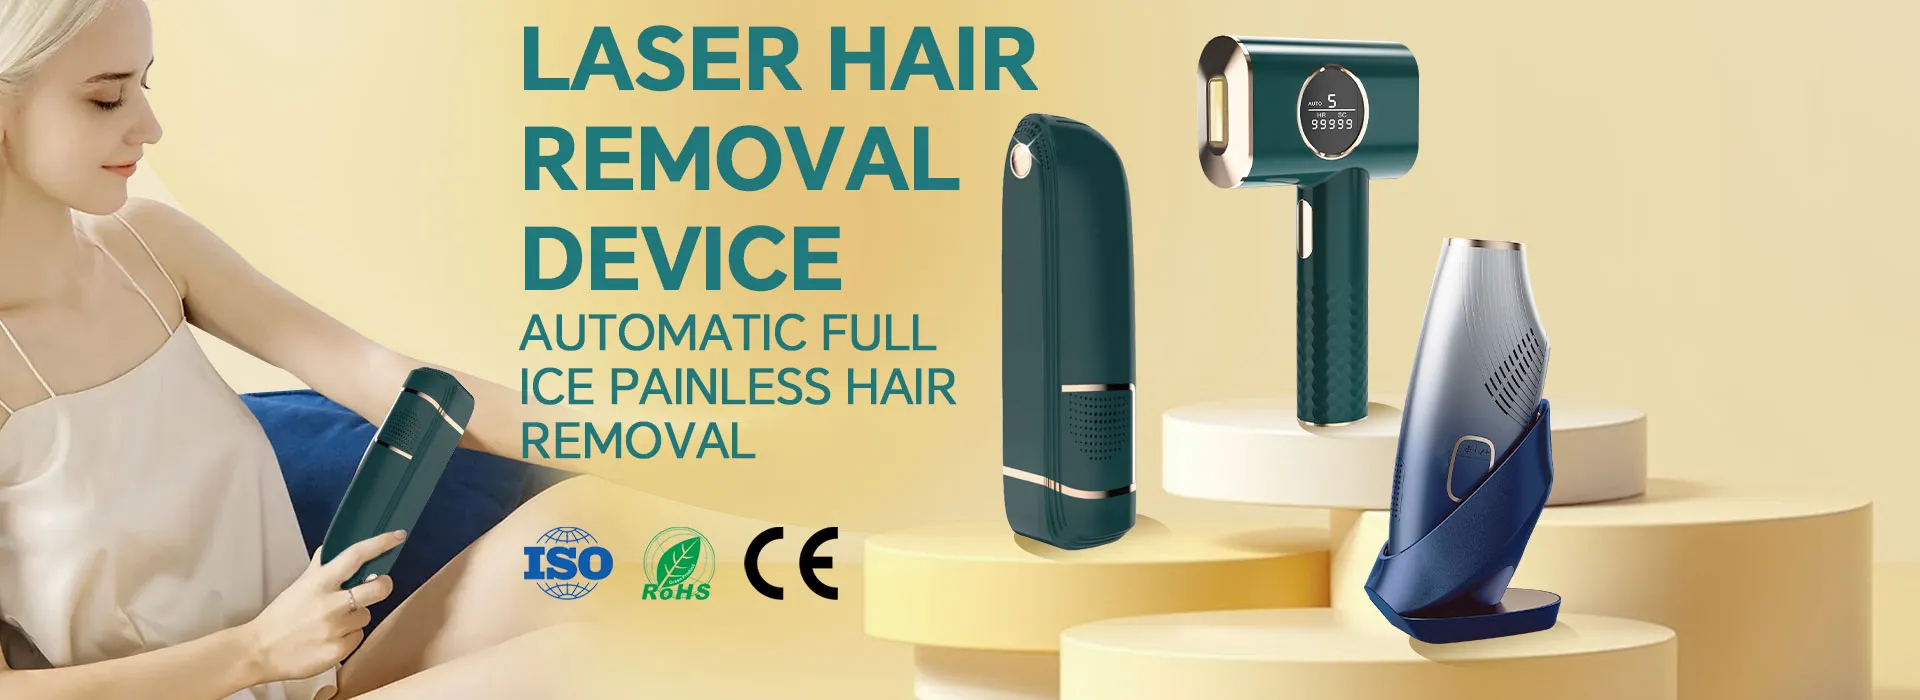 Laser Hair Removal Device Supplier